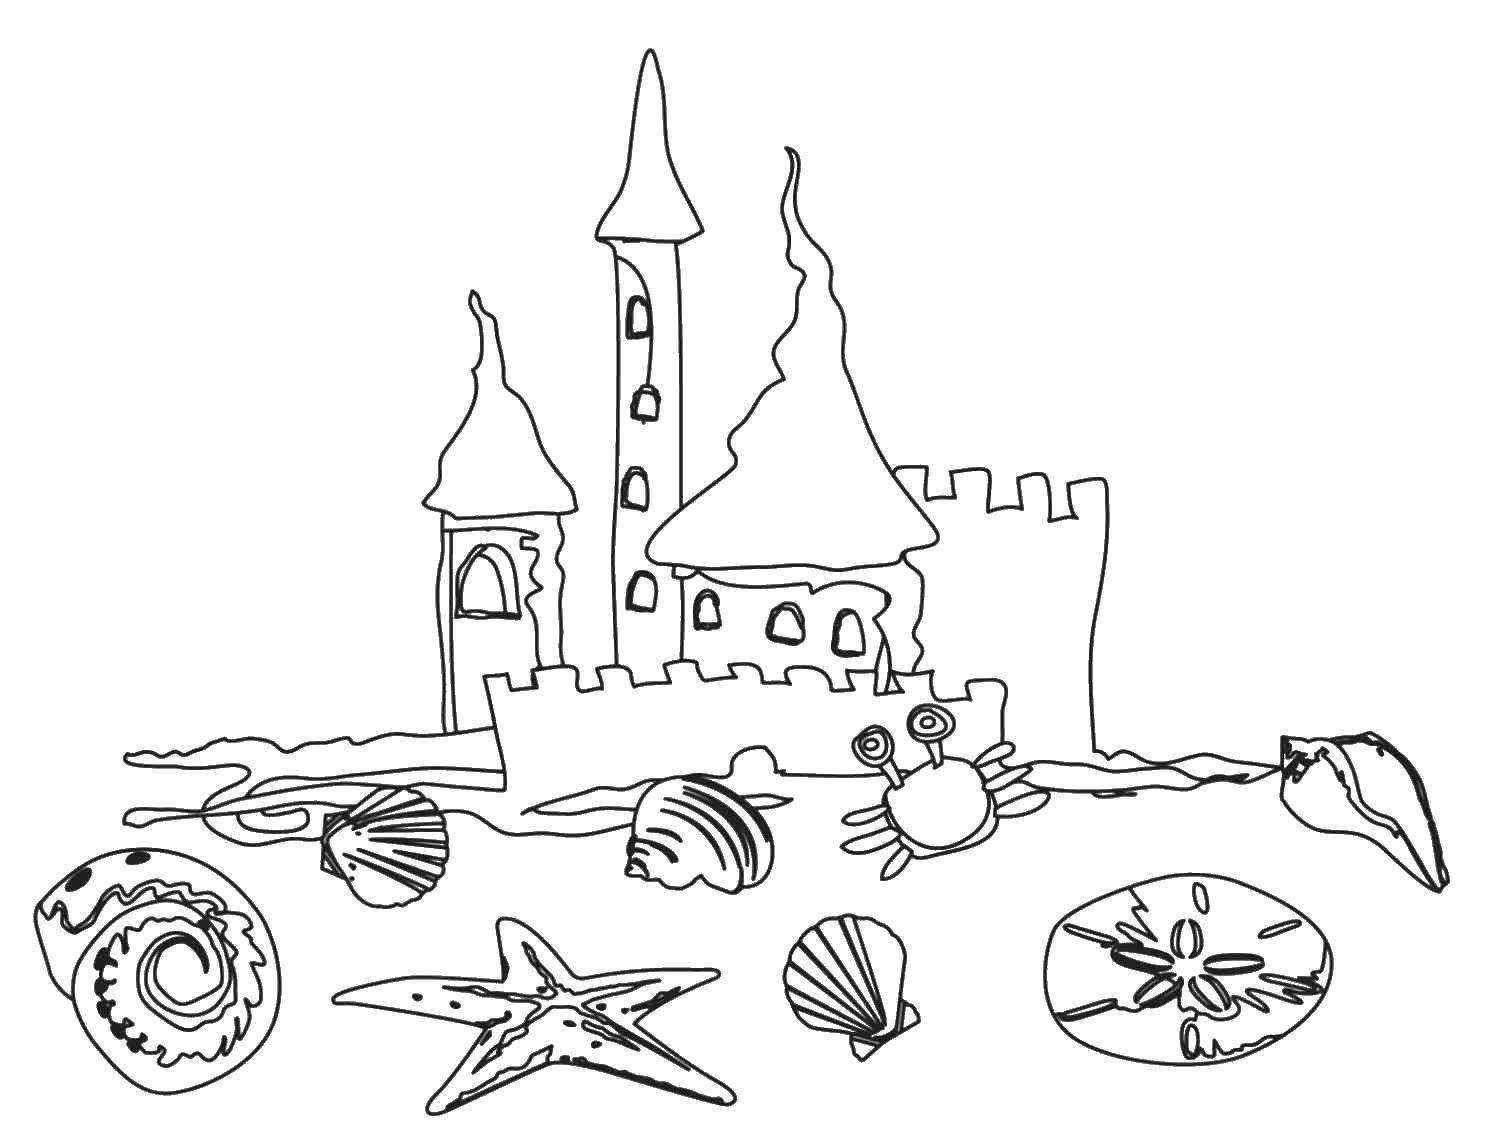 Coloring Crab, seashells and castle. Category Summer fun. Tags:  sand, beach.